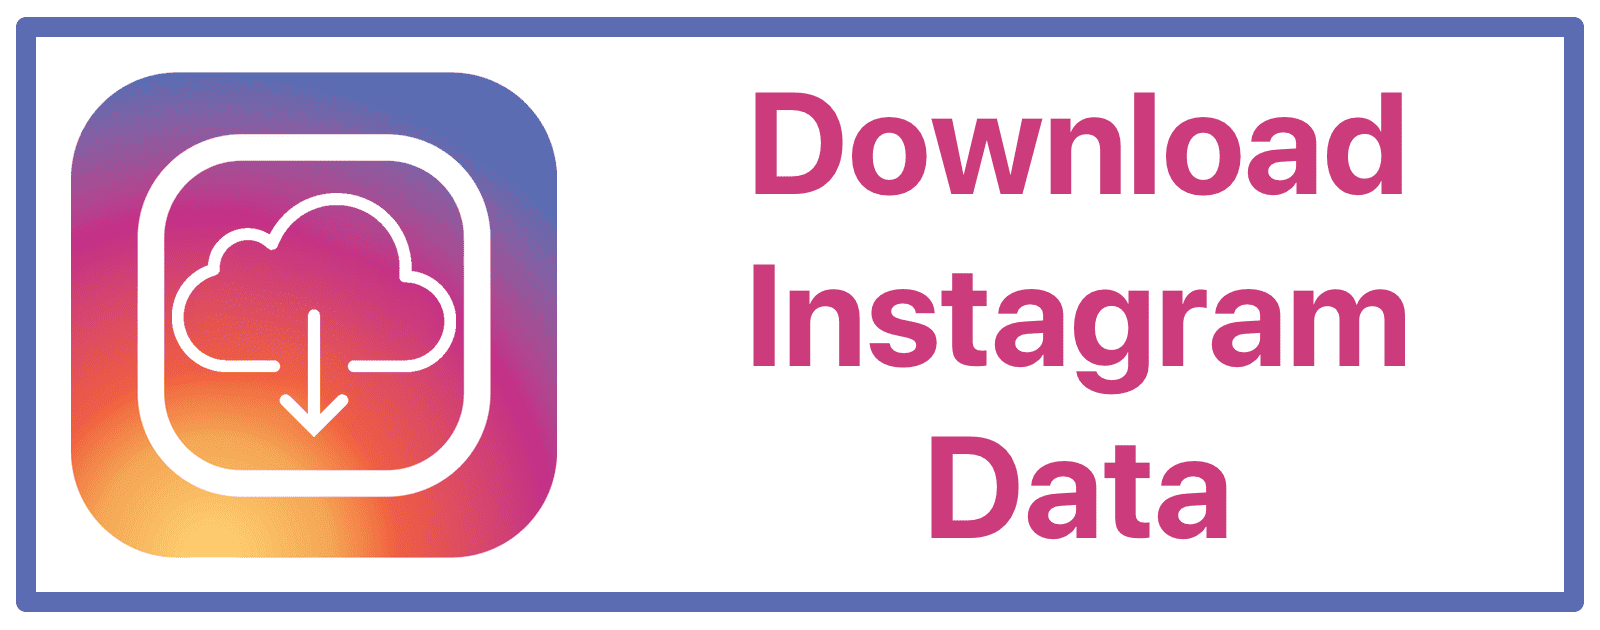 How to Download Instagram Data, Including Photos and Comments